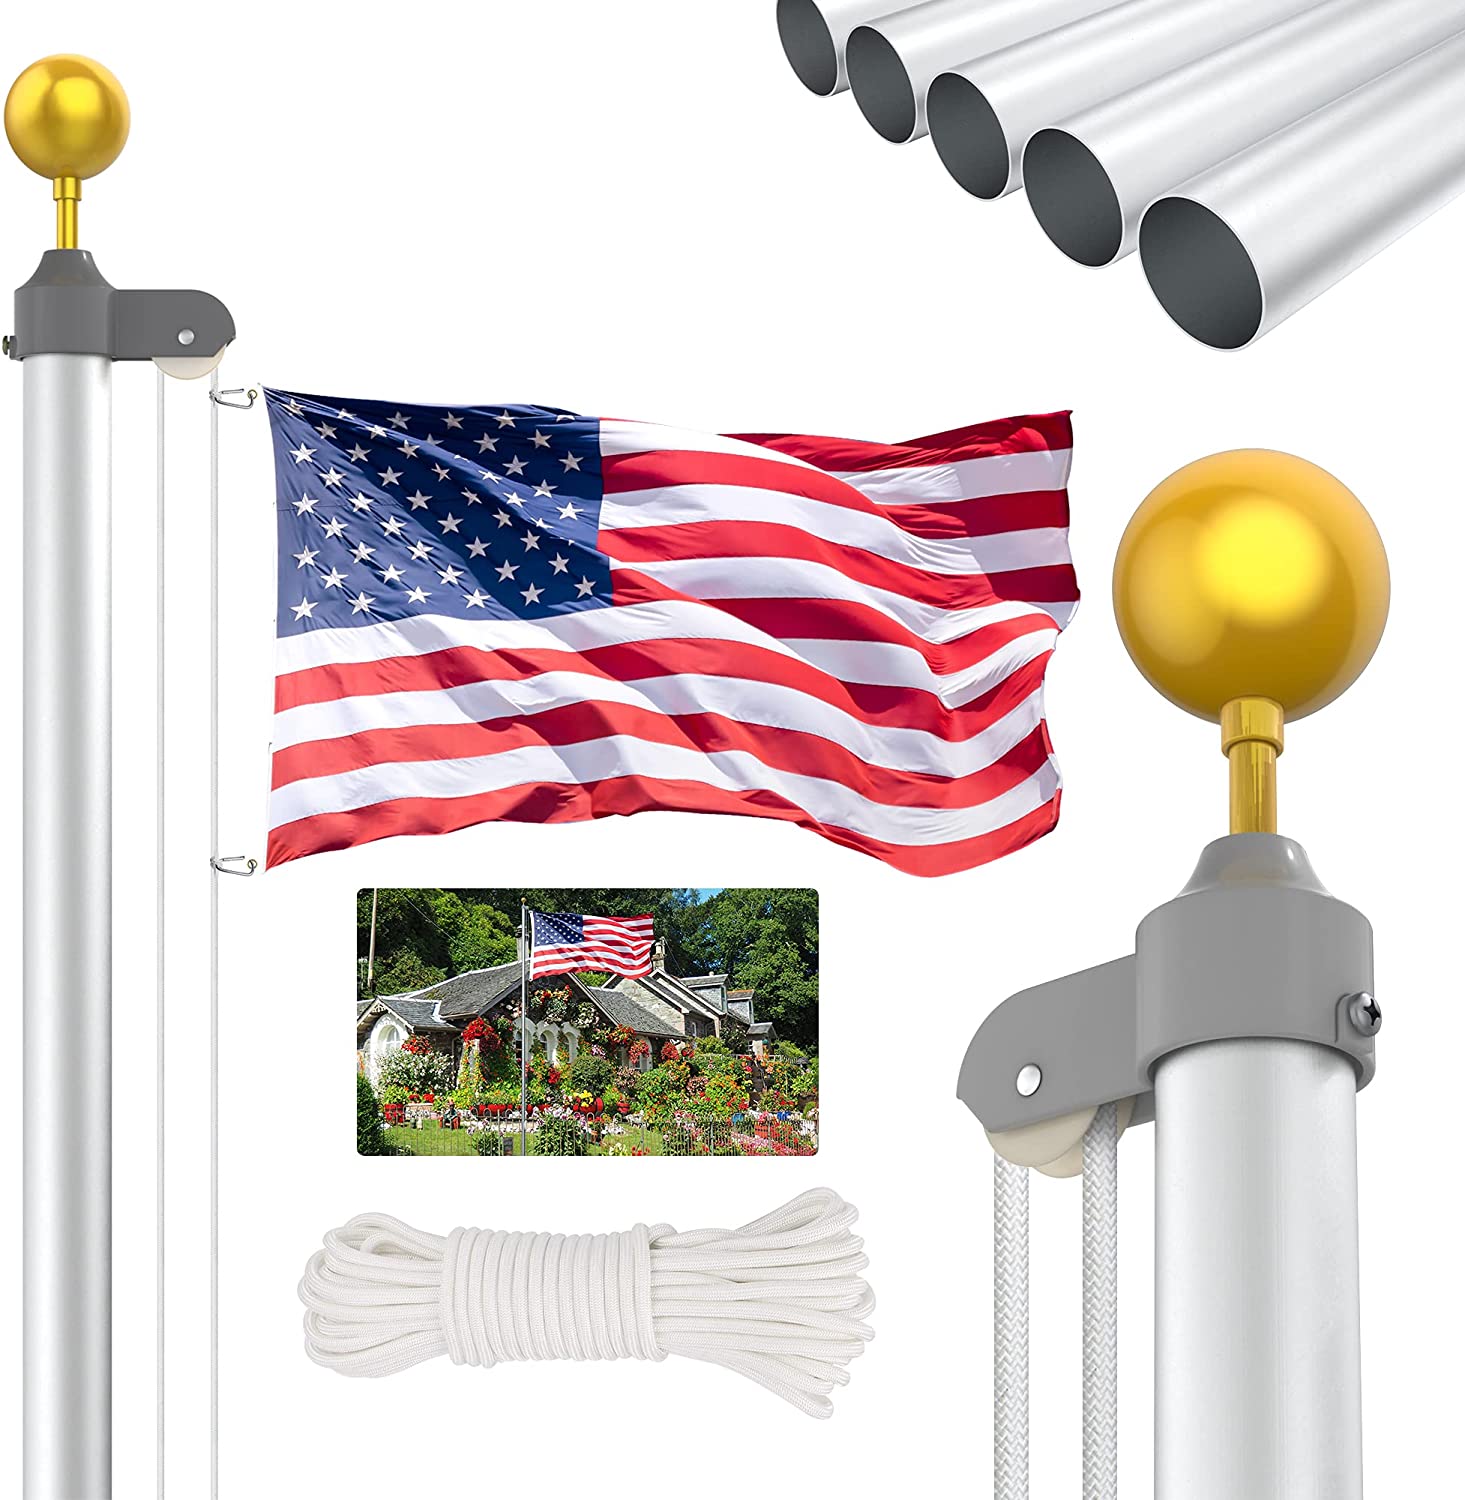 GUOHONG 20FT Flag Poles Kit,Extra Thick Heavy Duty 16 Gauge Aluminum Telescopic Flagpole Kit with 3'x5' US American Polyester Flag,Can Hang 2 Flags for Residential,Outdoor,Yard 20FT-Sectional 